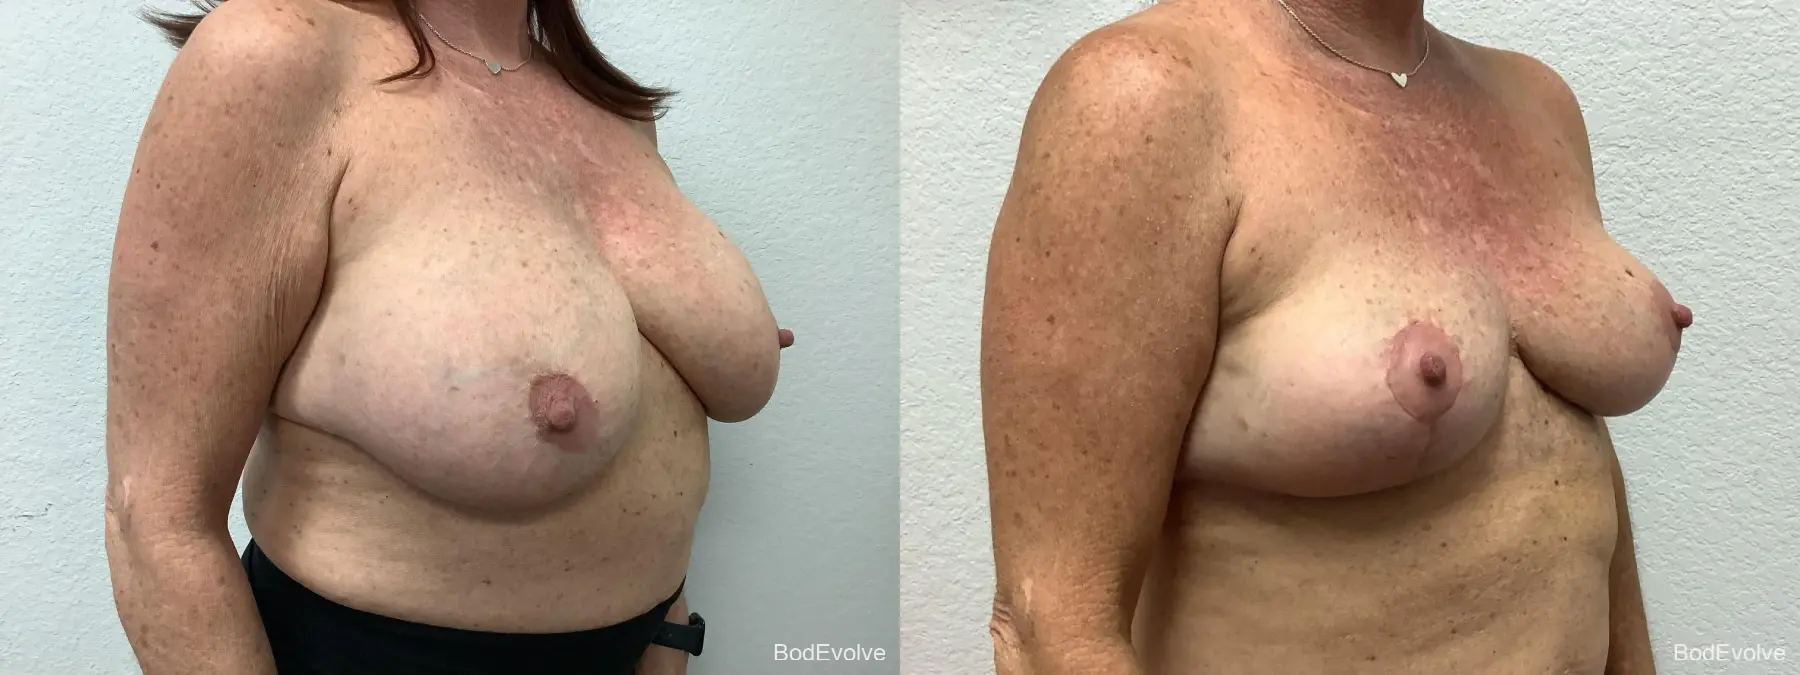 Breast Implant Removal With Lift: Patient 1 - Before and After 4